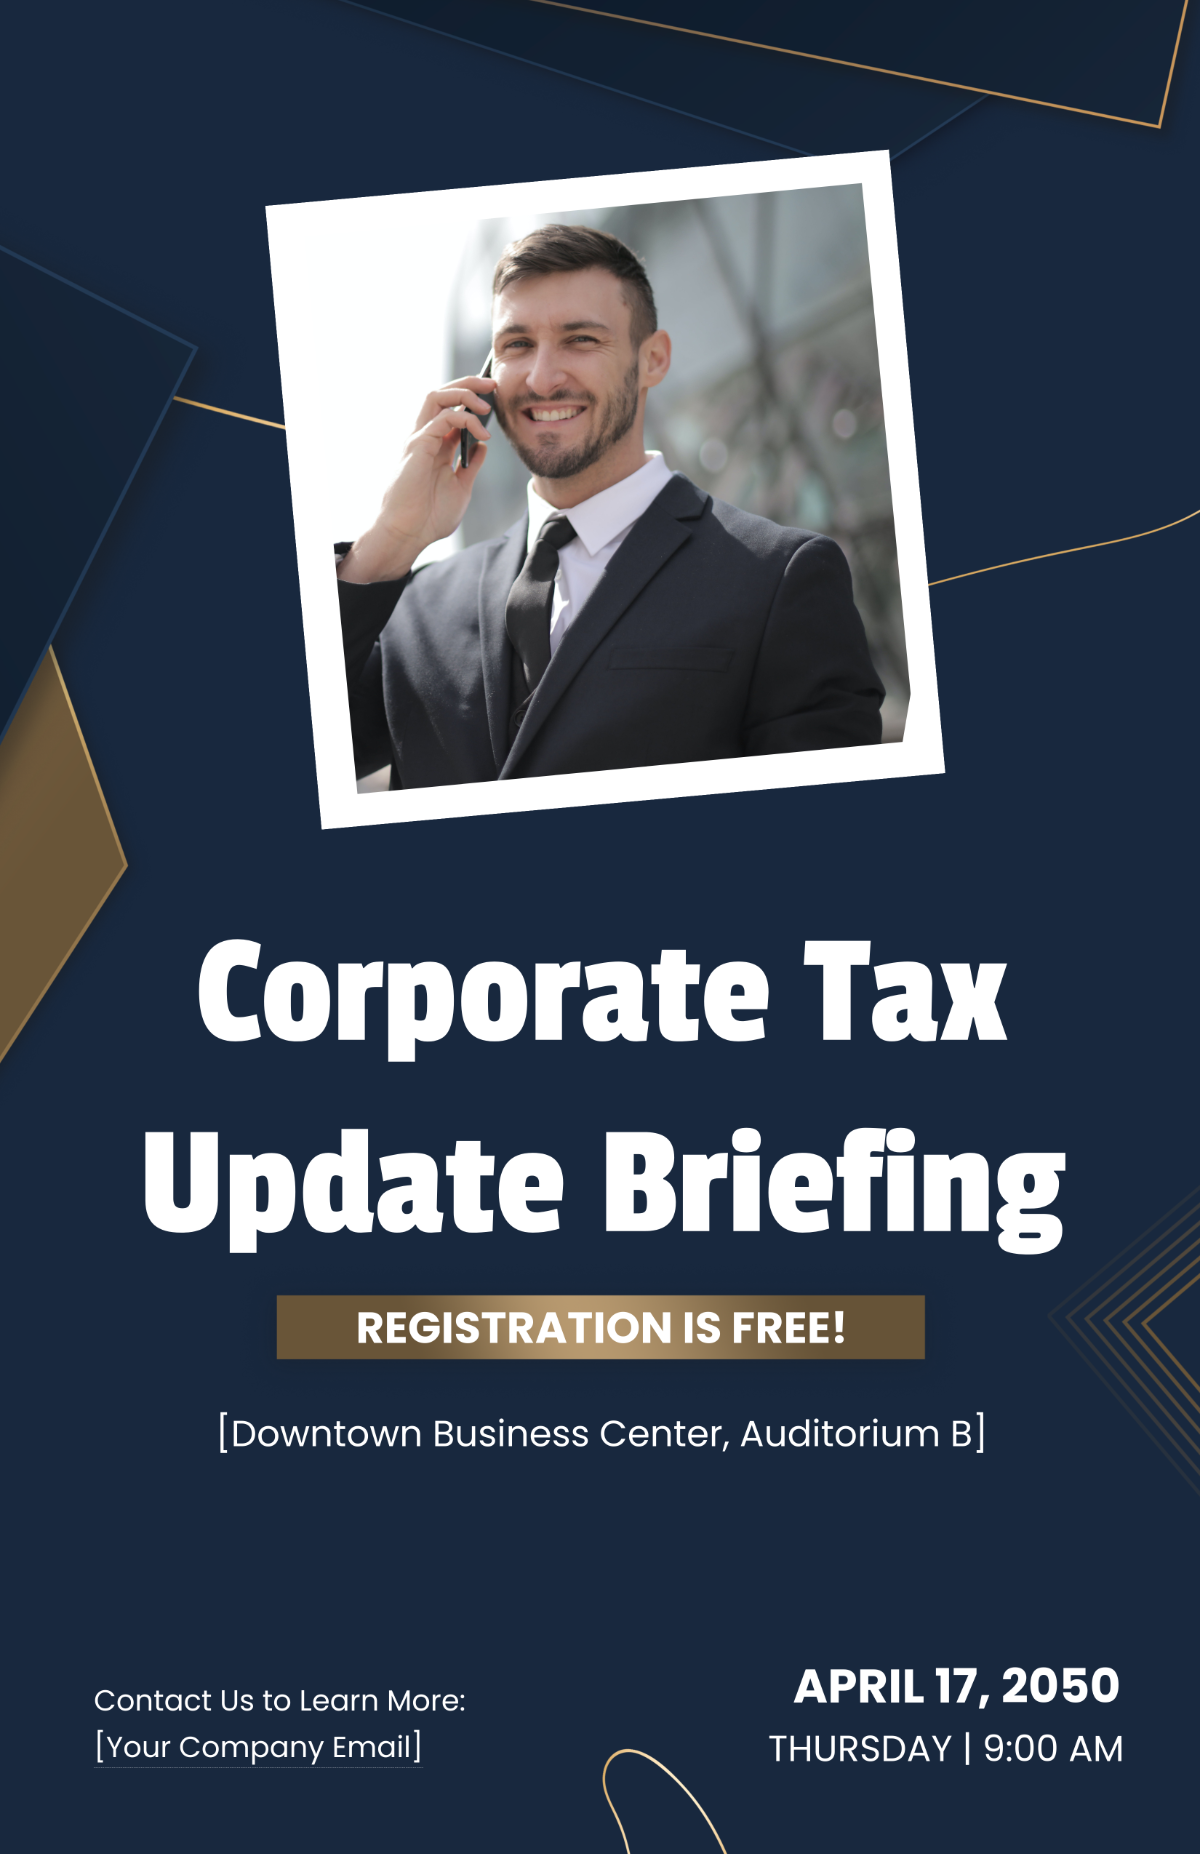 Corporate Tax Update Briefing Poster